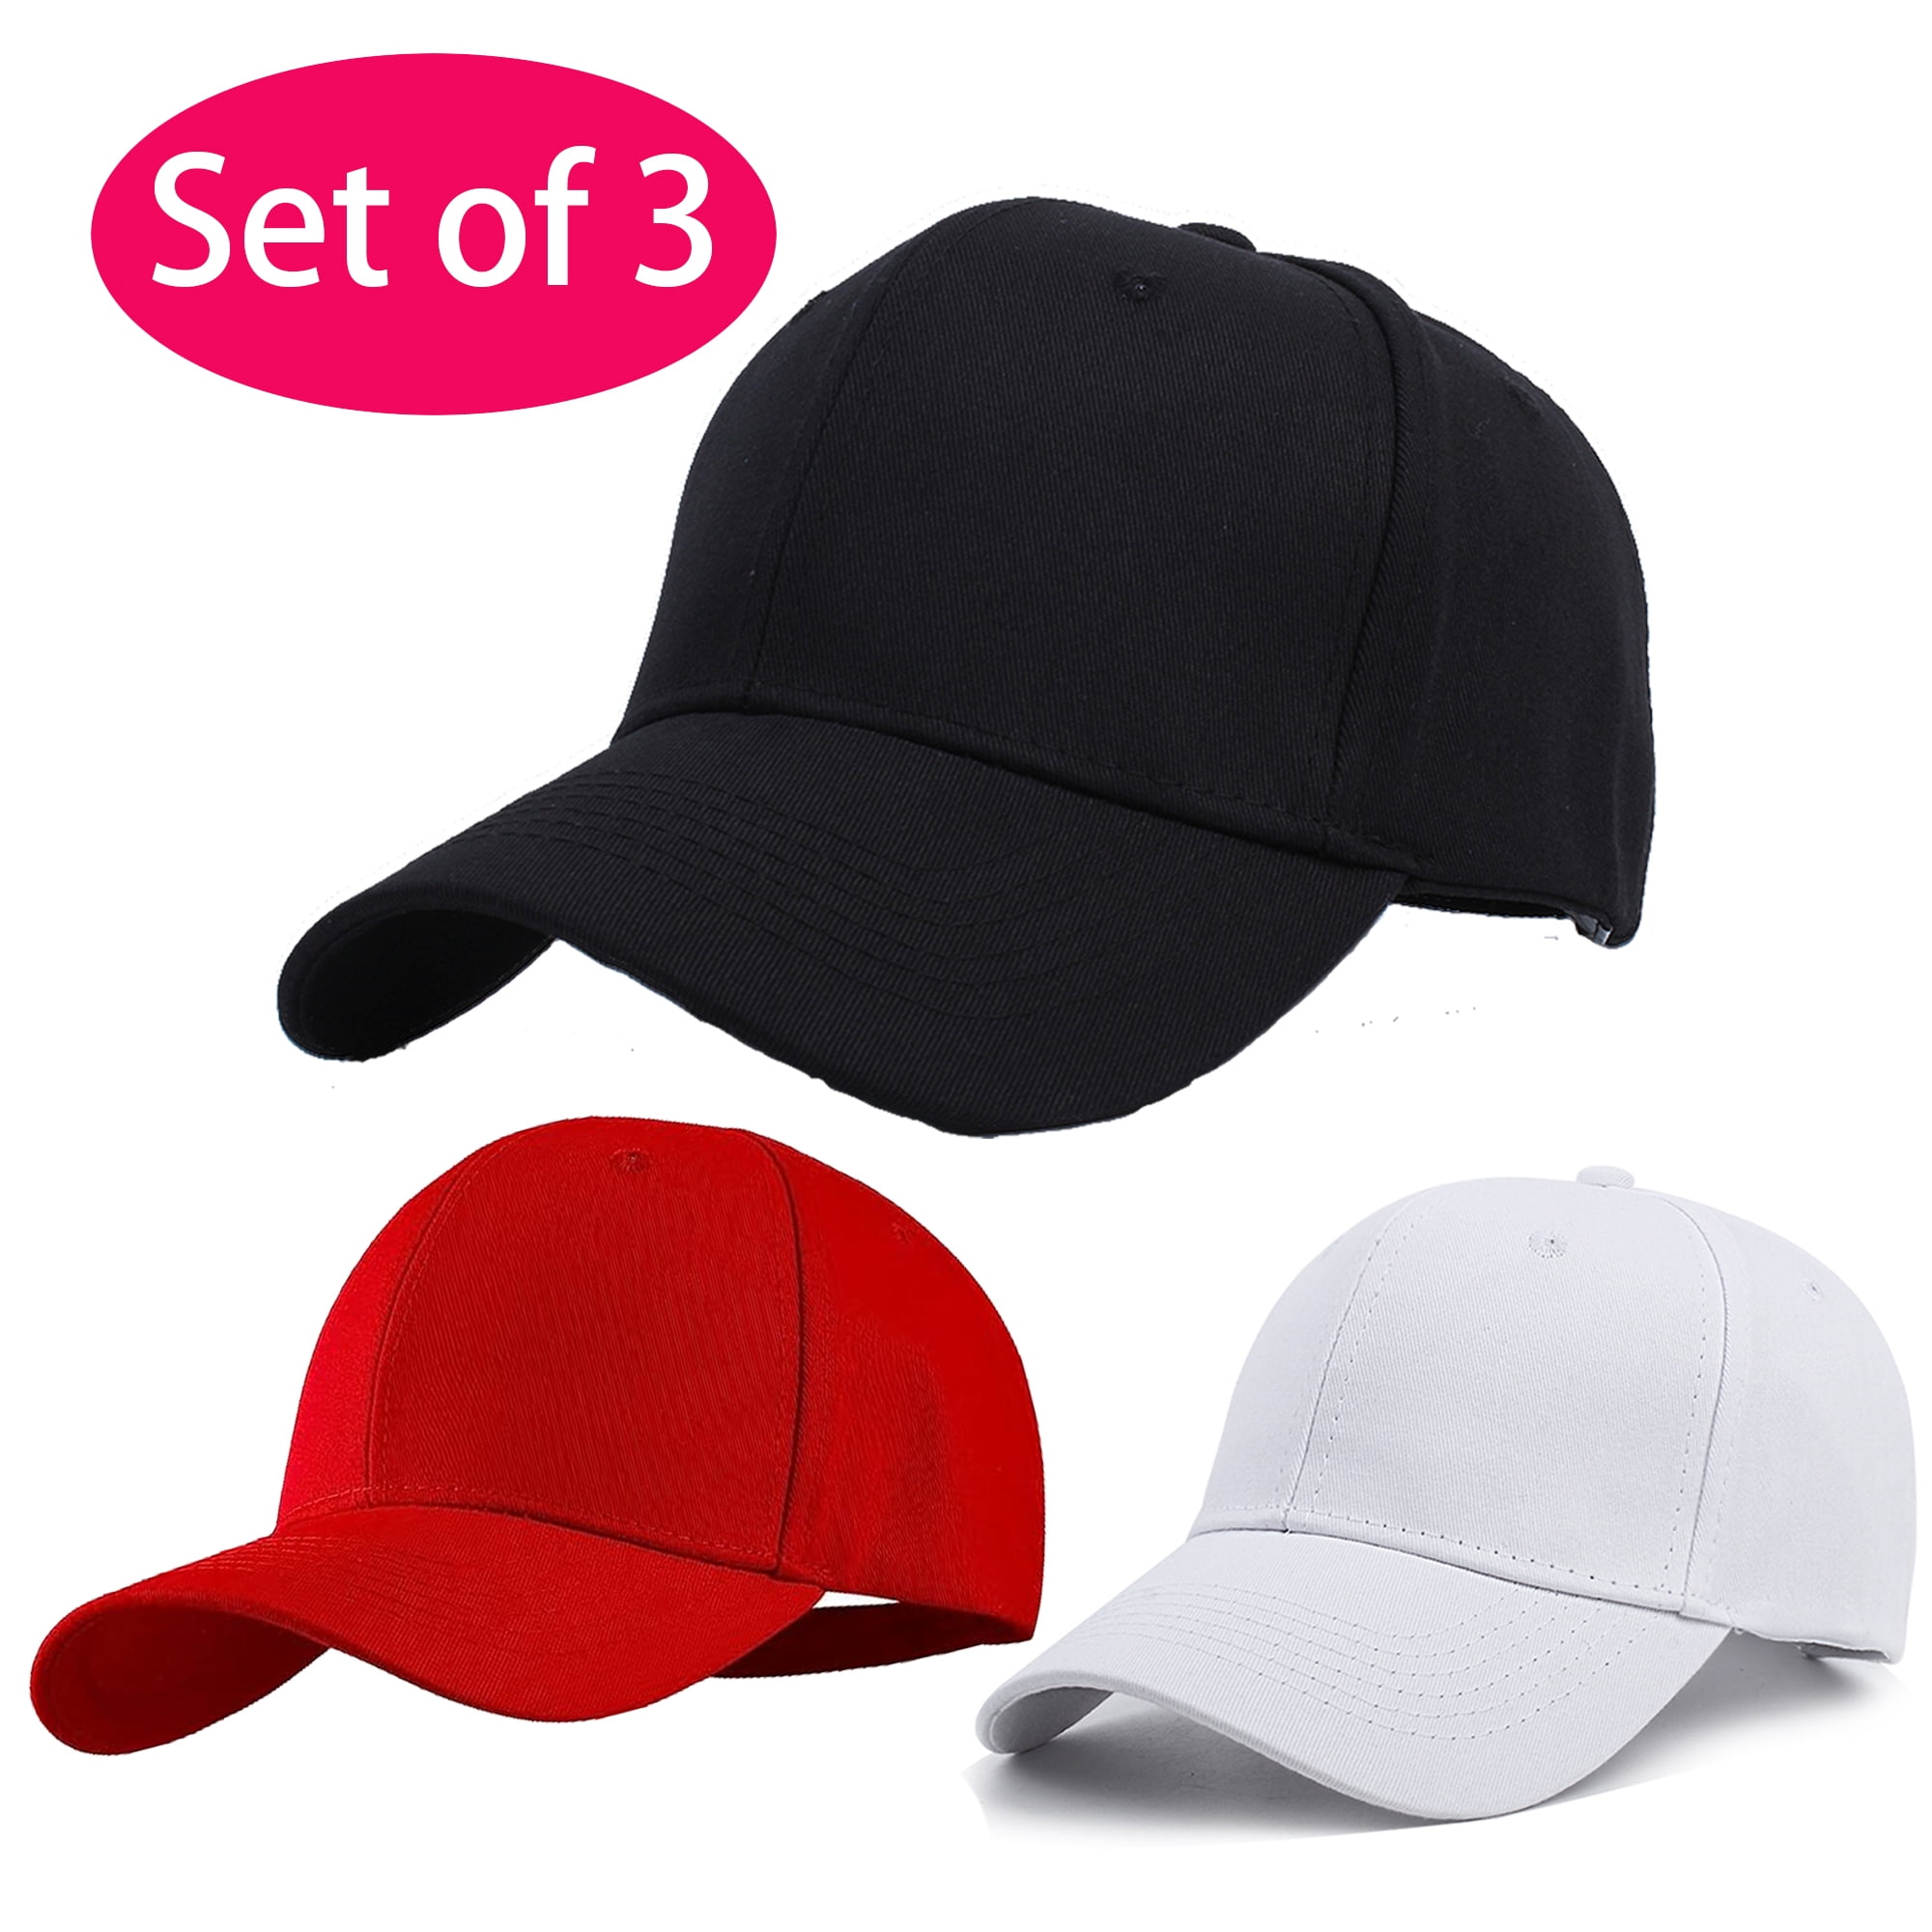 Base Ball Hat for Men & Women, Flex Fit Baseball Caps, Solid Cotton Fitted  Hats Set of 3 Red White & Black for Outdoor Sports All Seasons